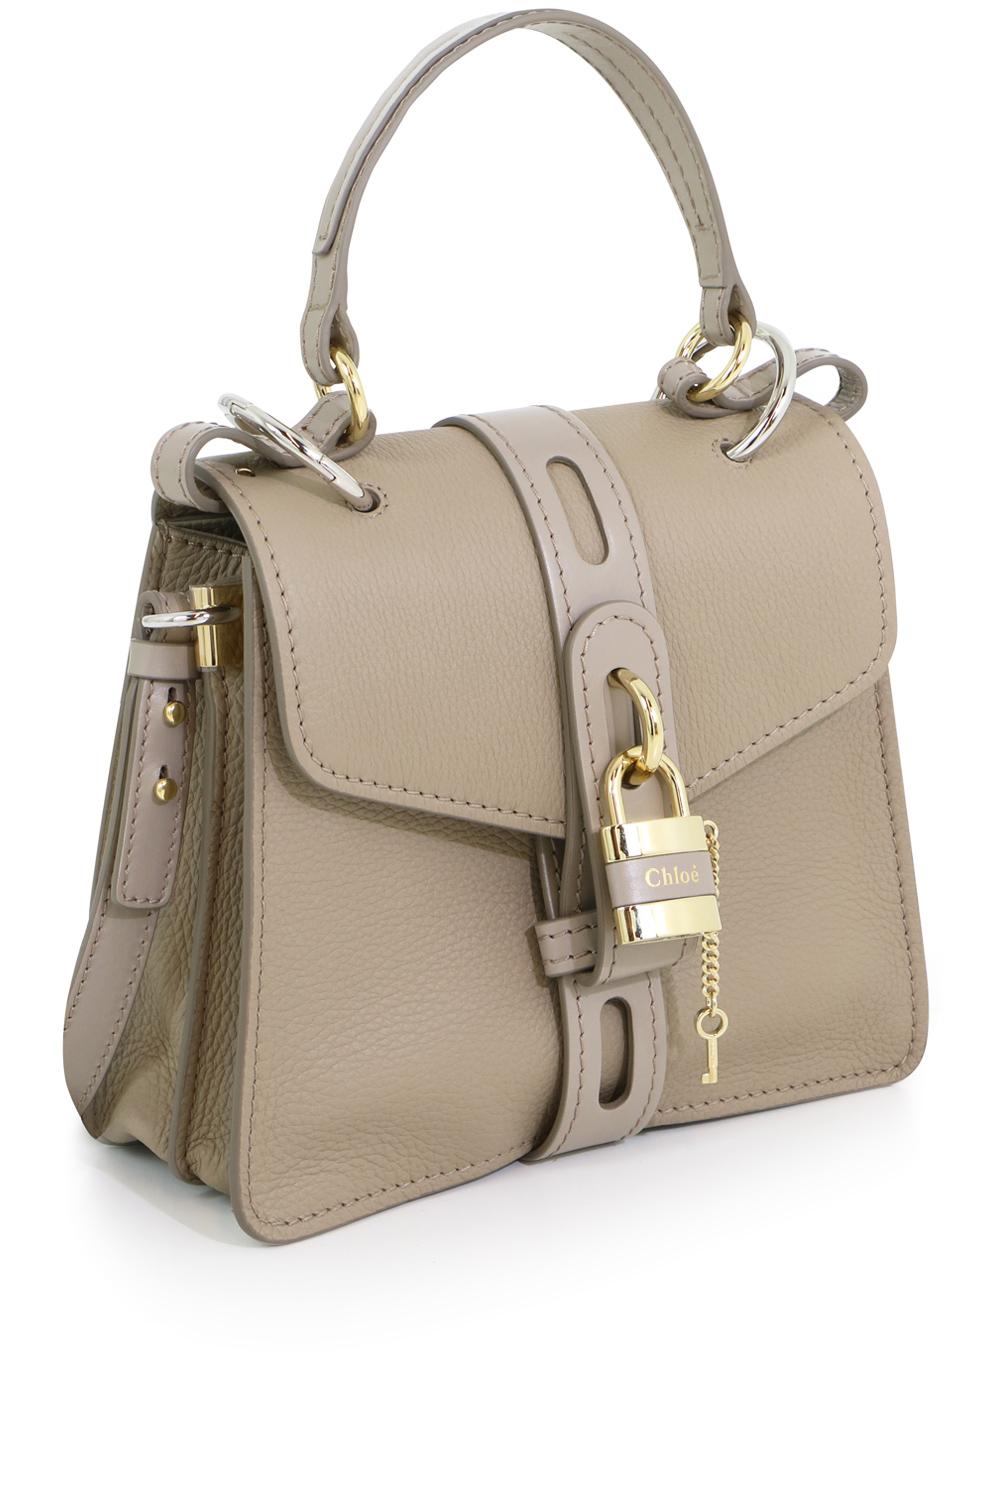 Chloé Aby Small Leather Shoulder Bag in Grey (Gray) - Lyst